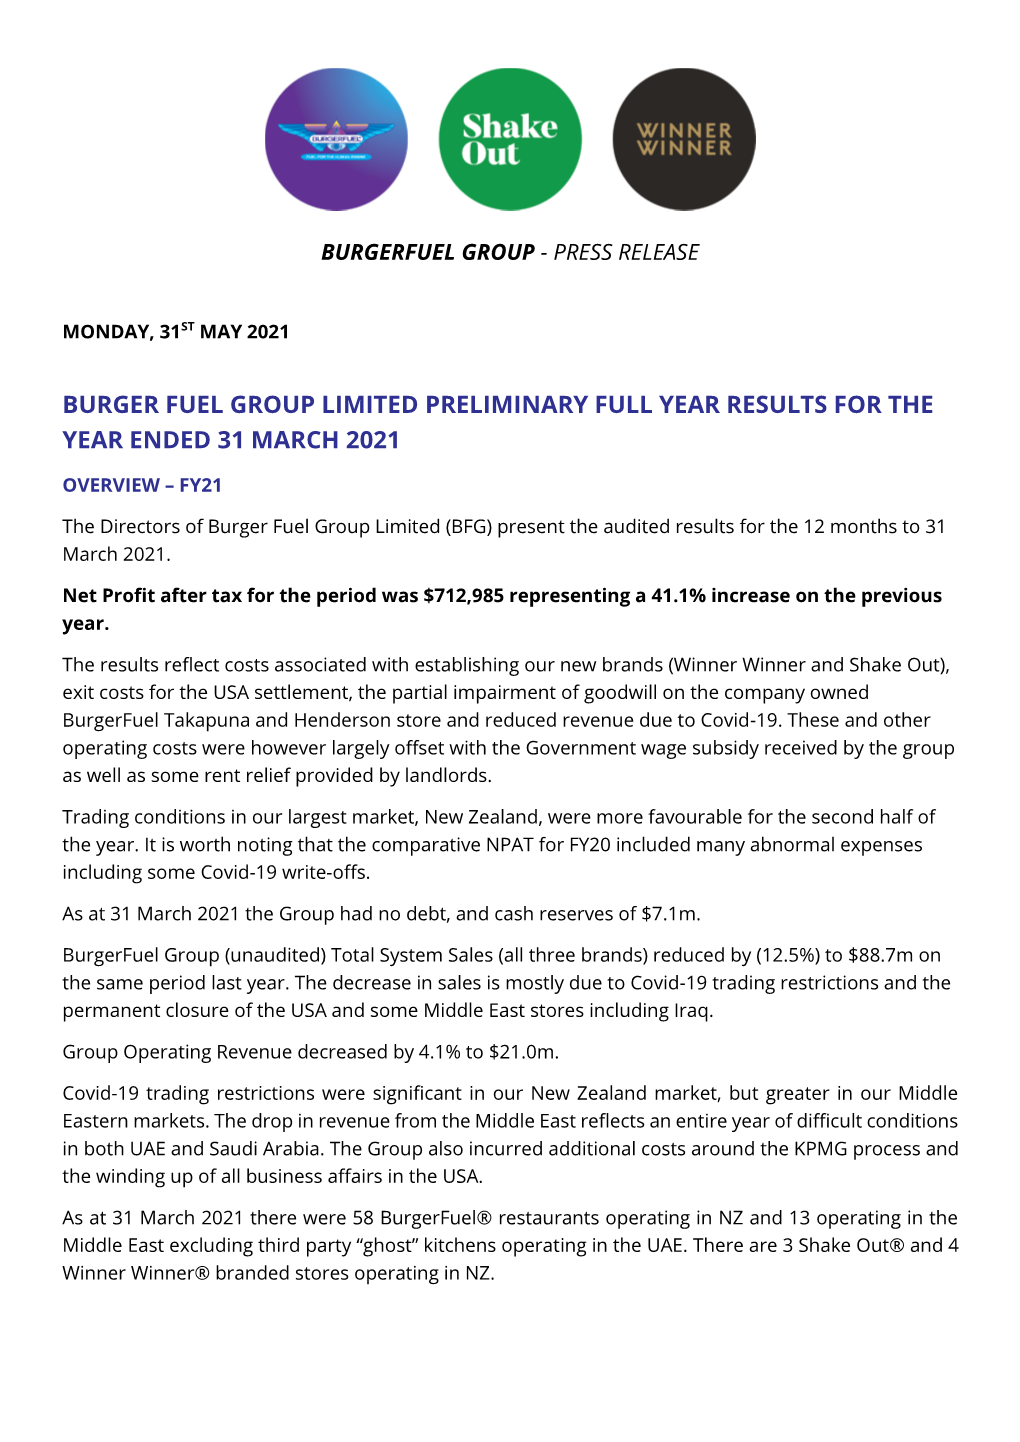 Burger Fuel Group Limited Preliminary Full Year Results for the Year Ended 31 March 2021